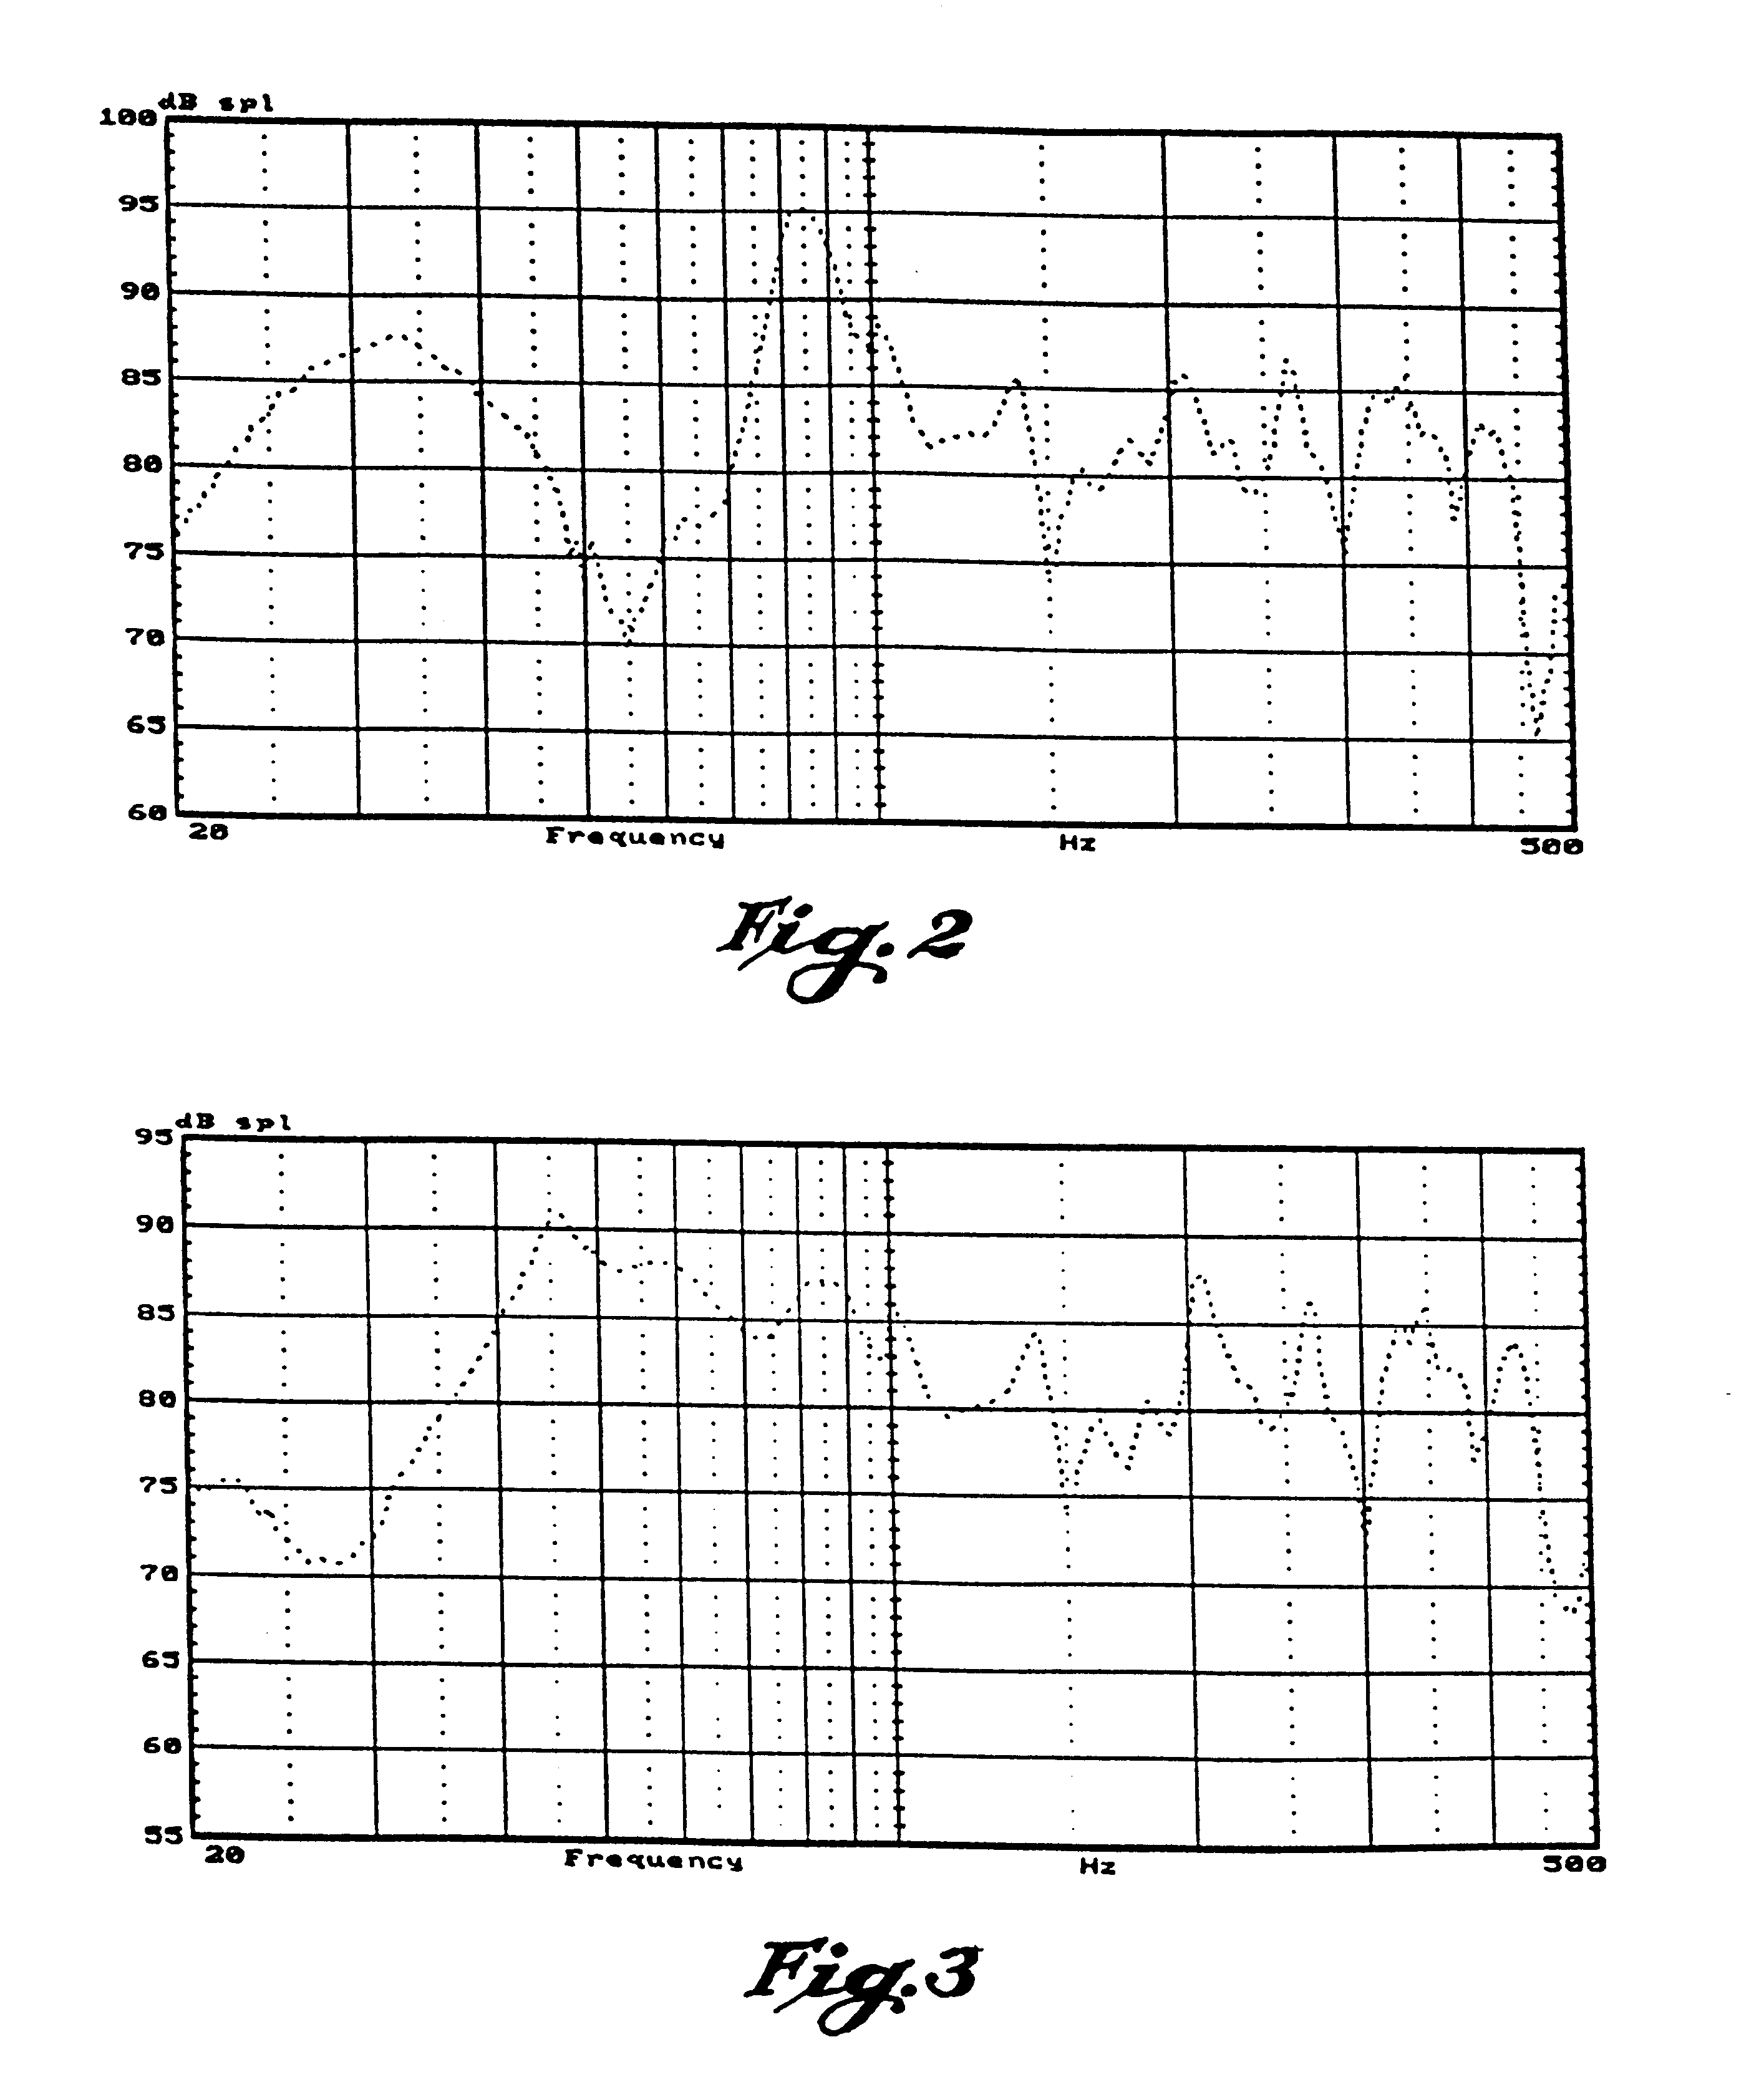 Planar diaphragm loudspeakers with non-uniform air resistive loading for low frequency modal control